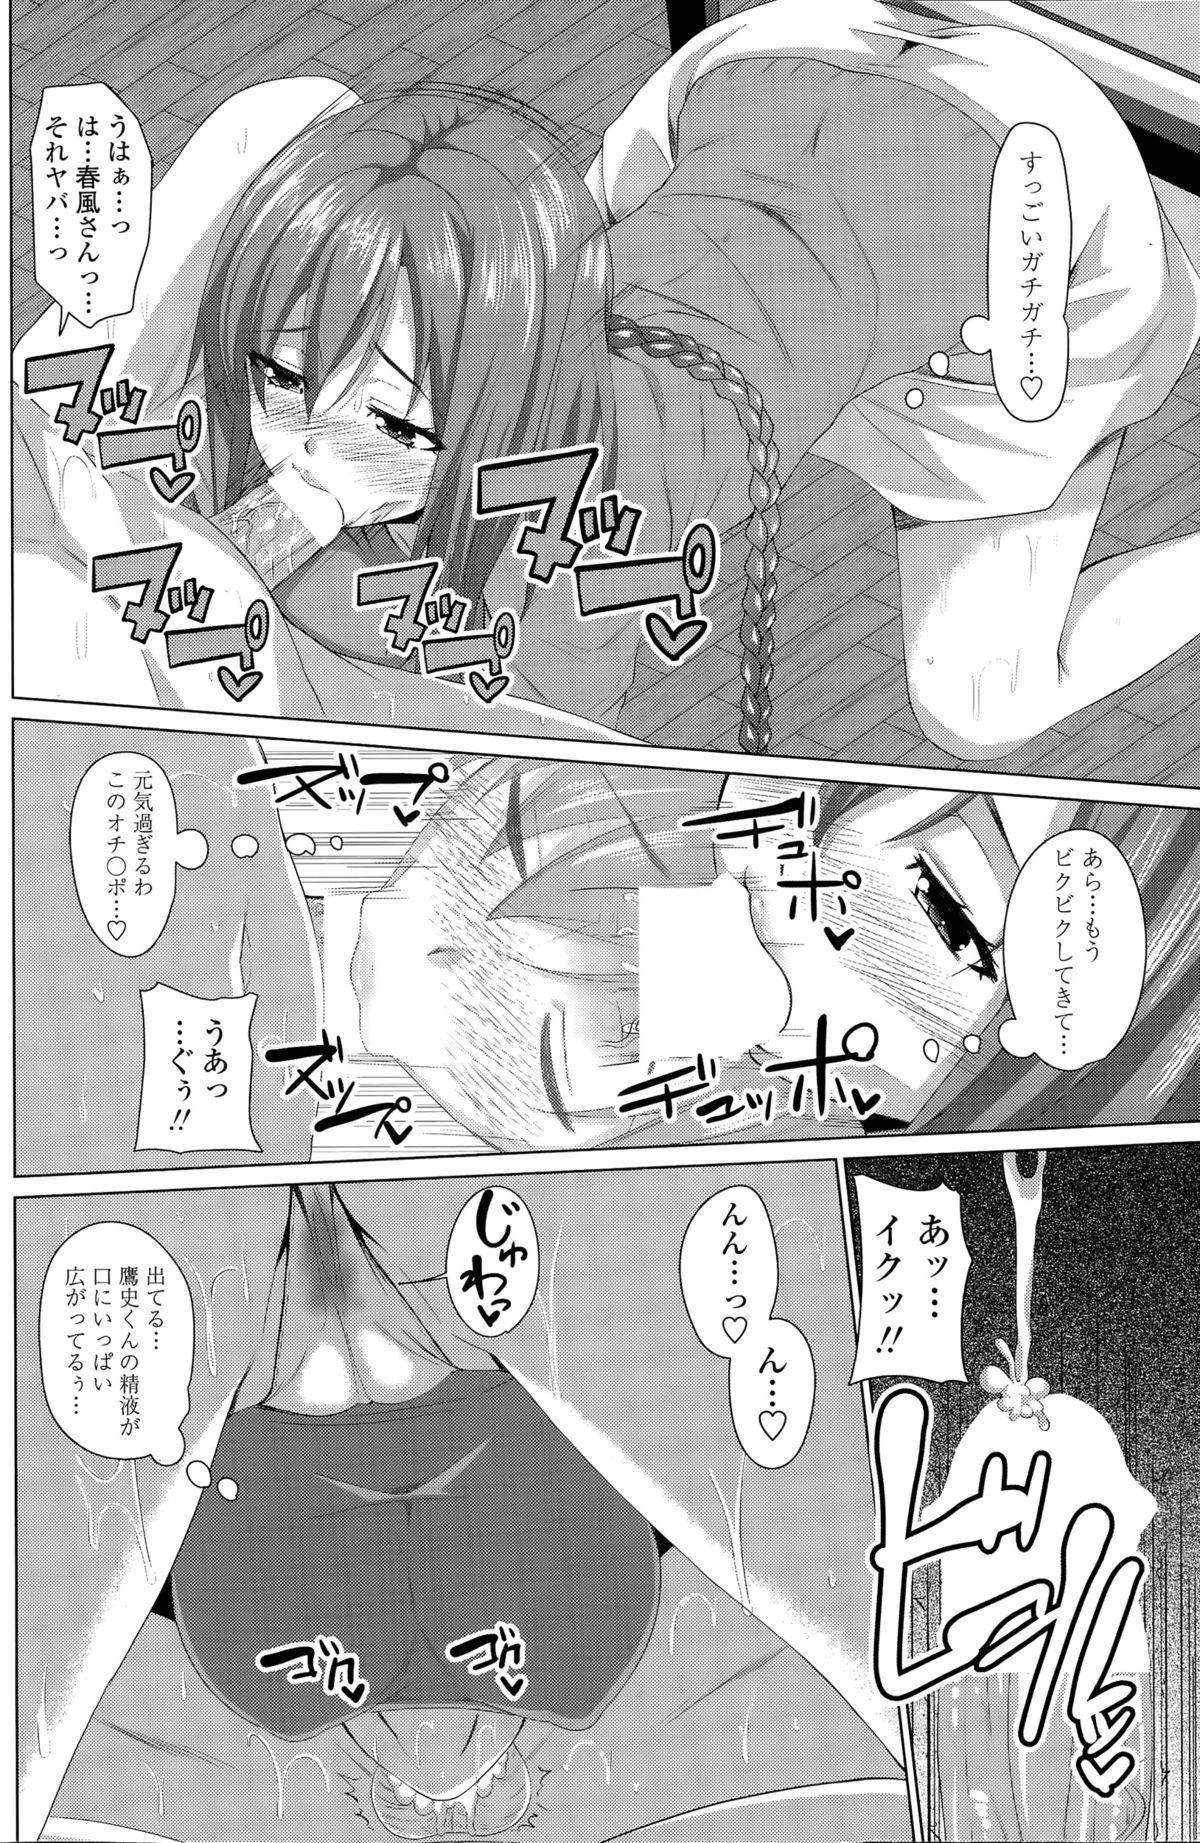 Rola Horse Rotation Ch. 1-2 Home - Page 6